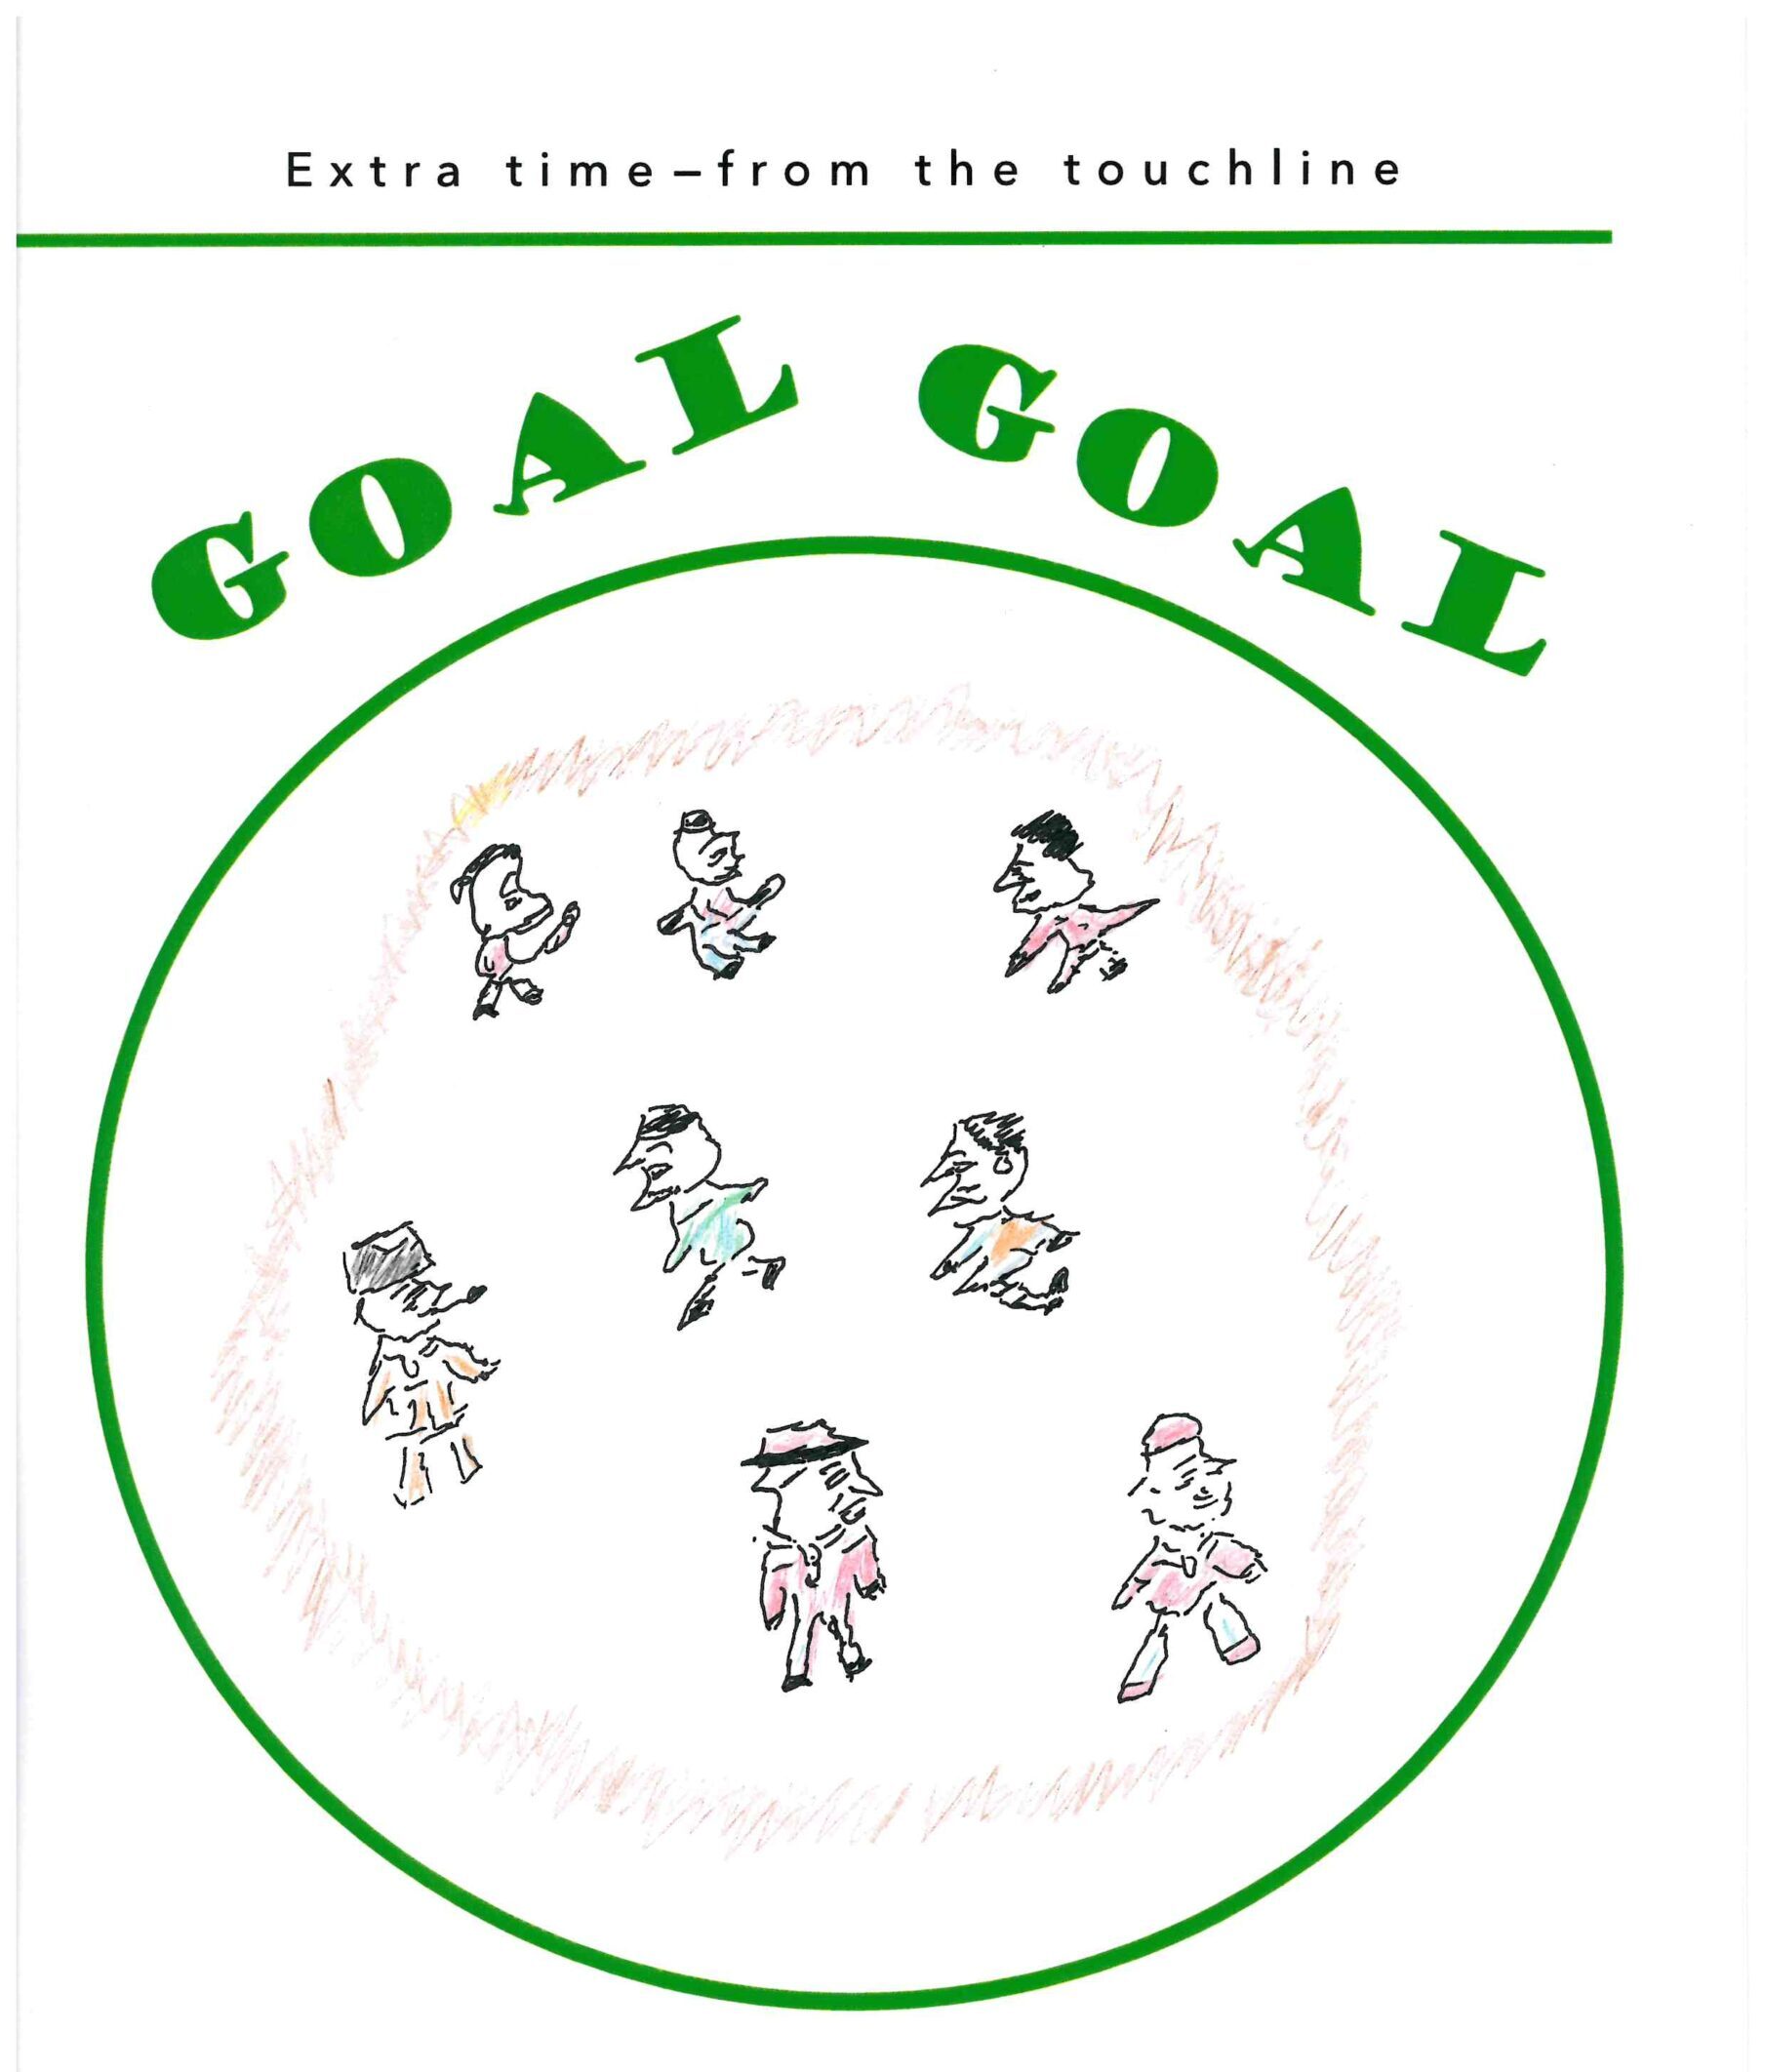 A cartoon of 8 figures drawn inside a green circle with words Goal Goal at the top